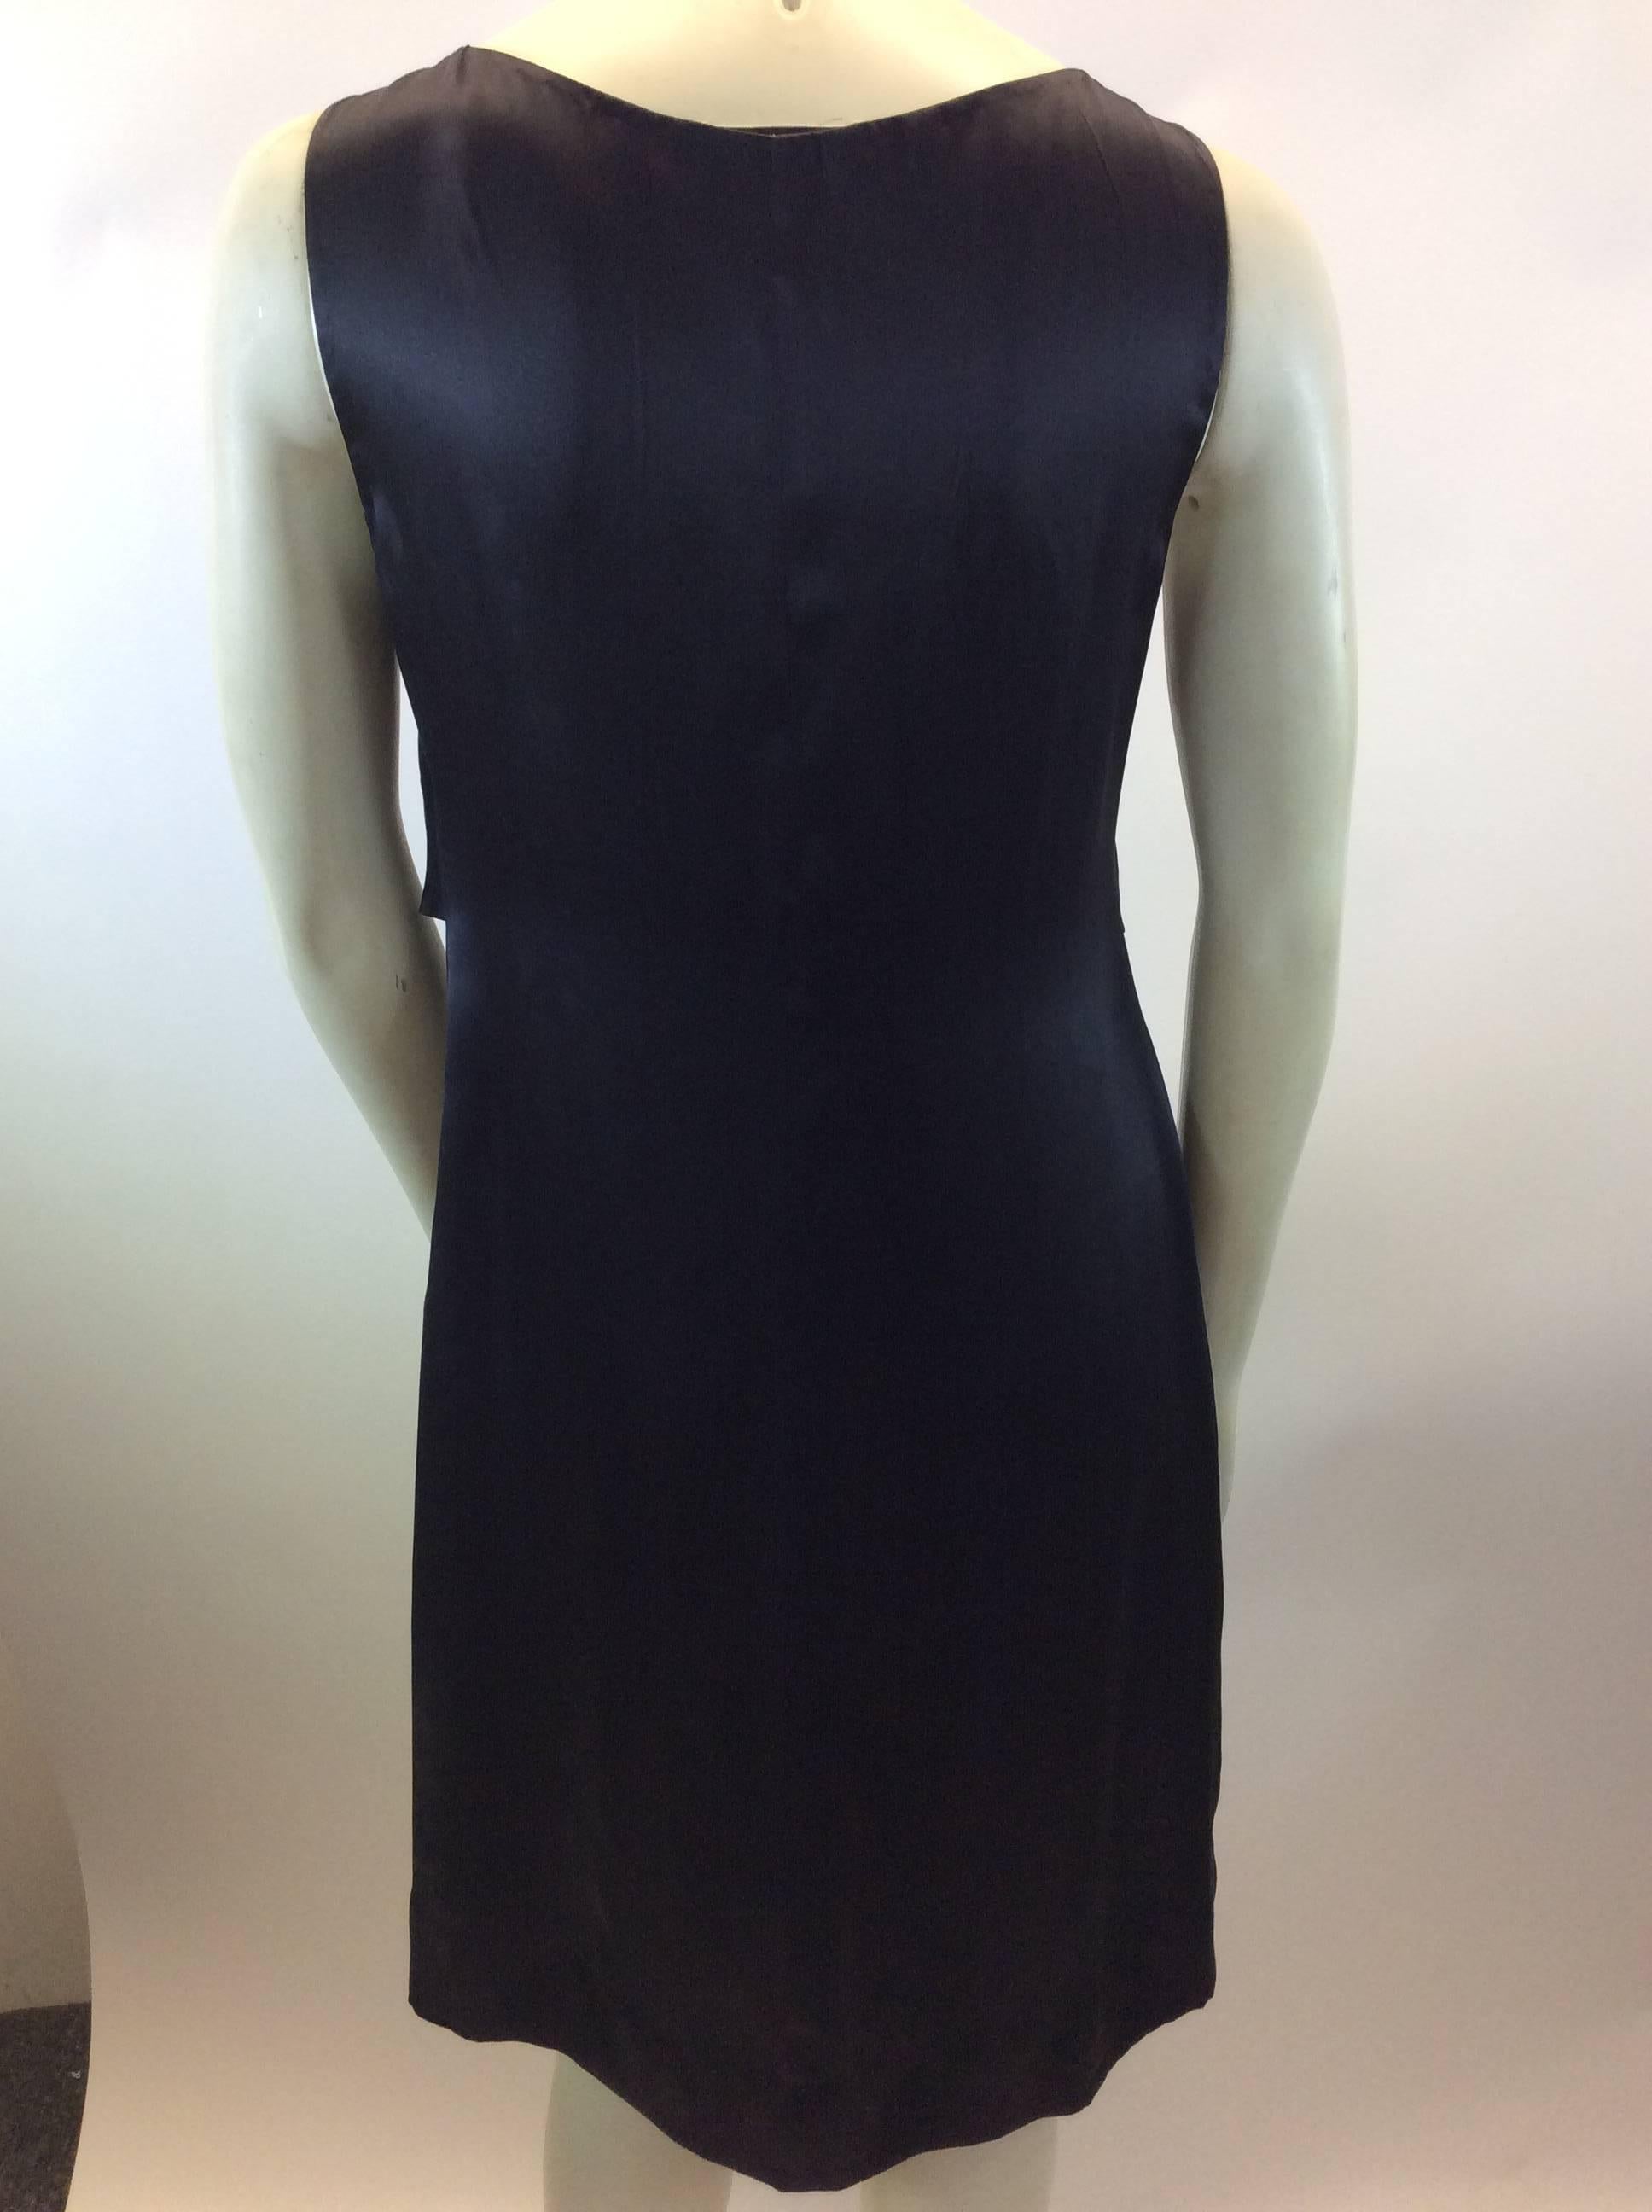 Prada Black Silk Dress In Excellent Condition For Sale In Narberth, PA